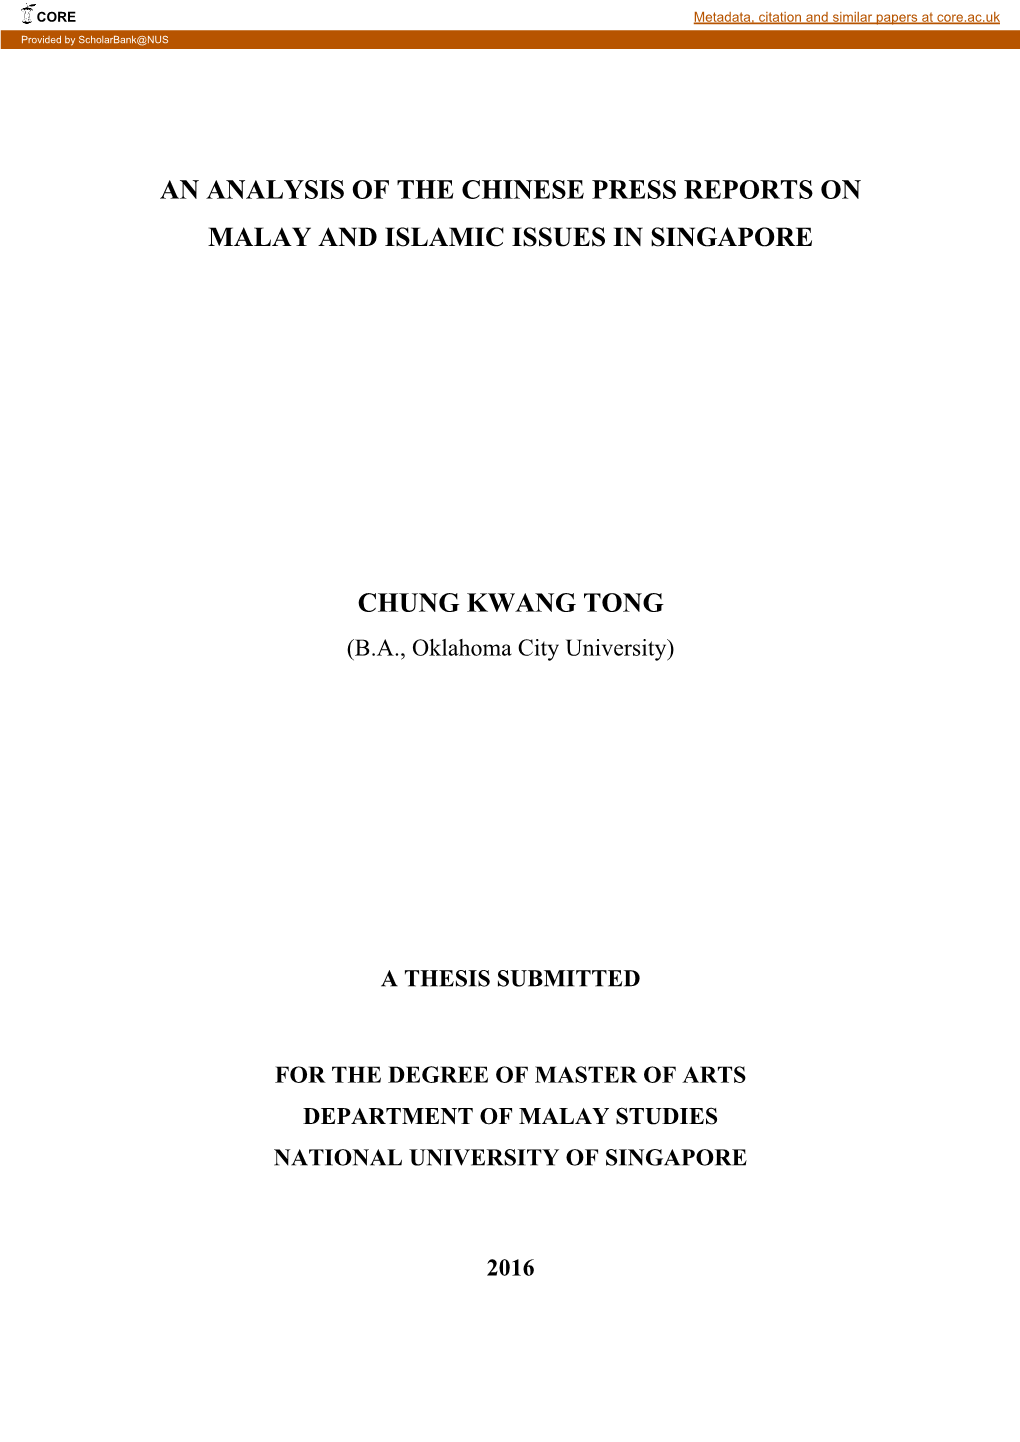 An Analysis of the Chinese Press Reports on Malay and Islamic Issues in Singapore